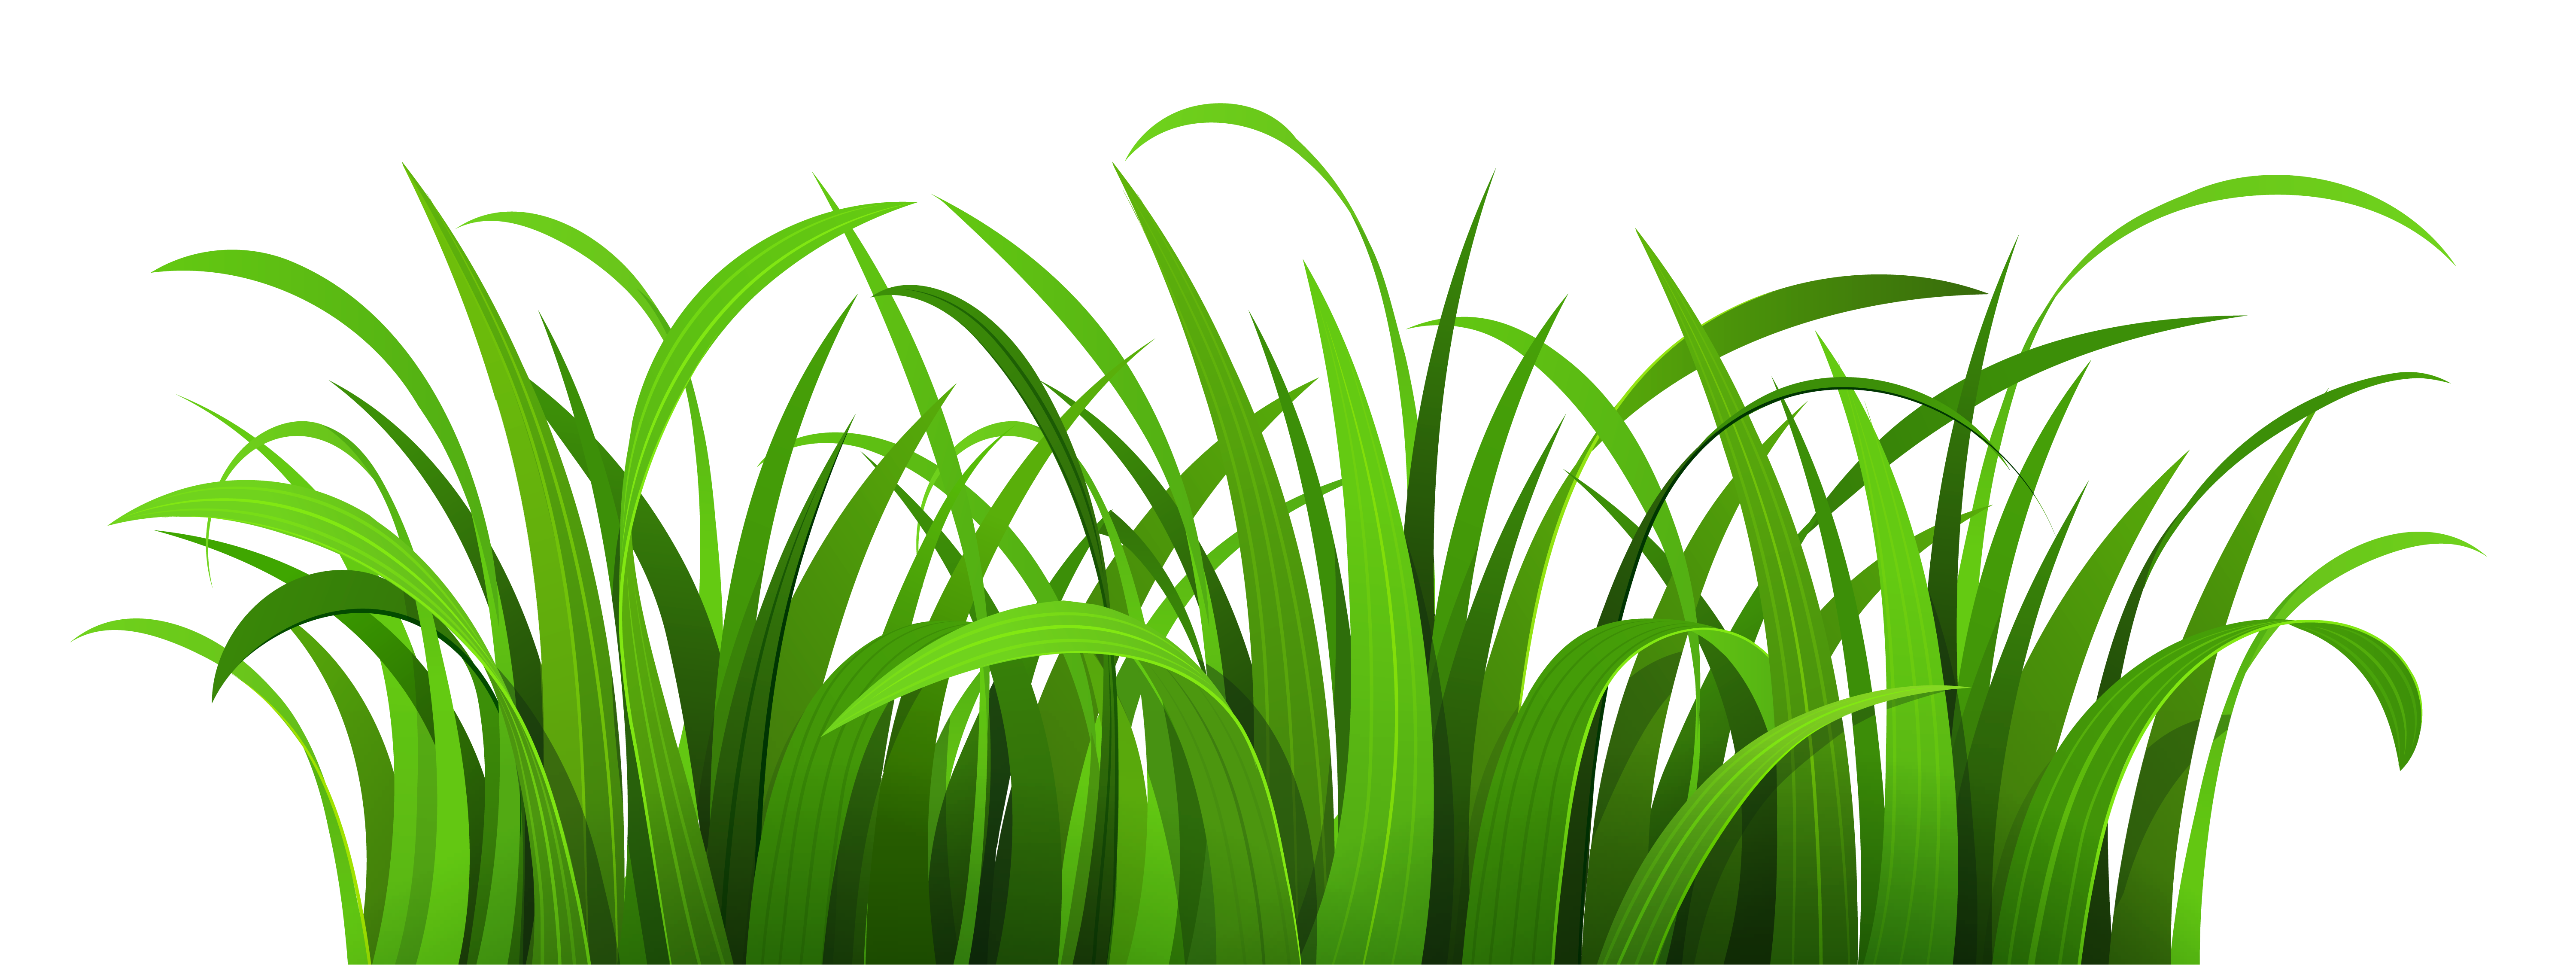 Free Cartoon Pictures Of Grass, Download Free Cartoon Pictures Of Grass